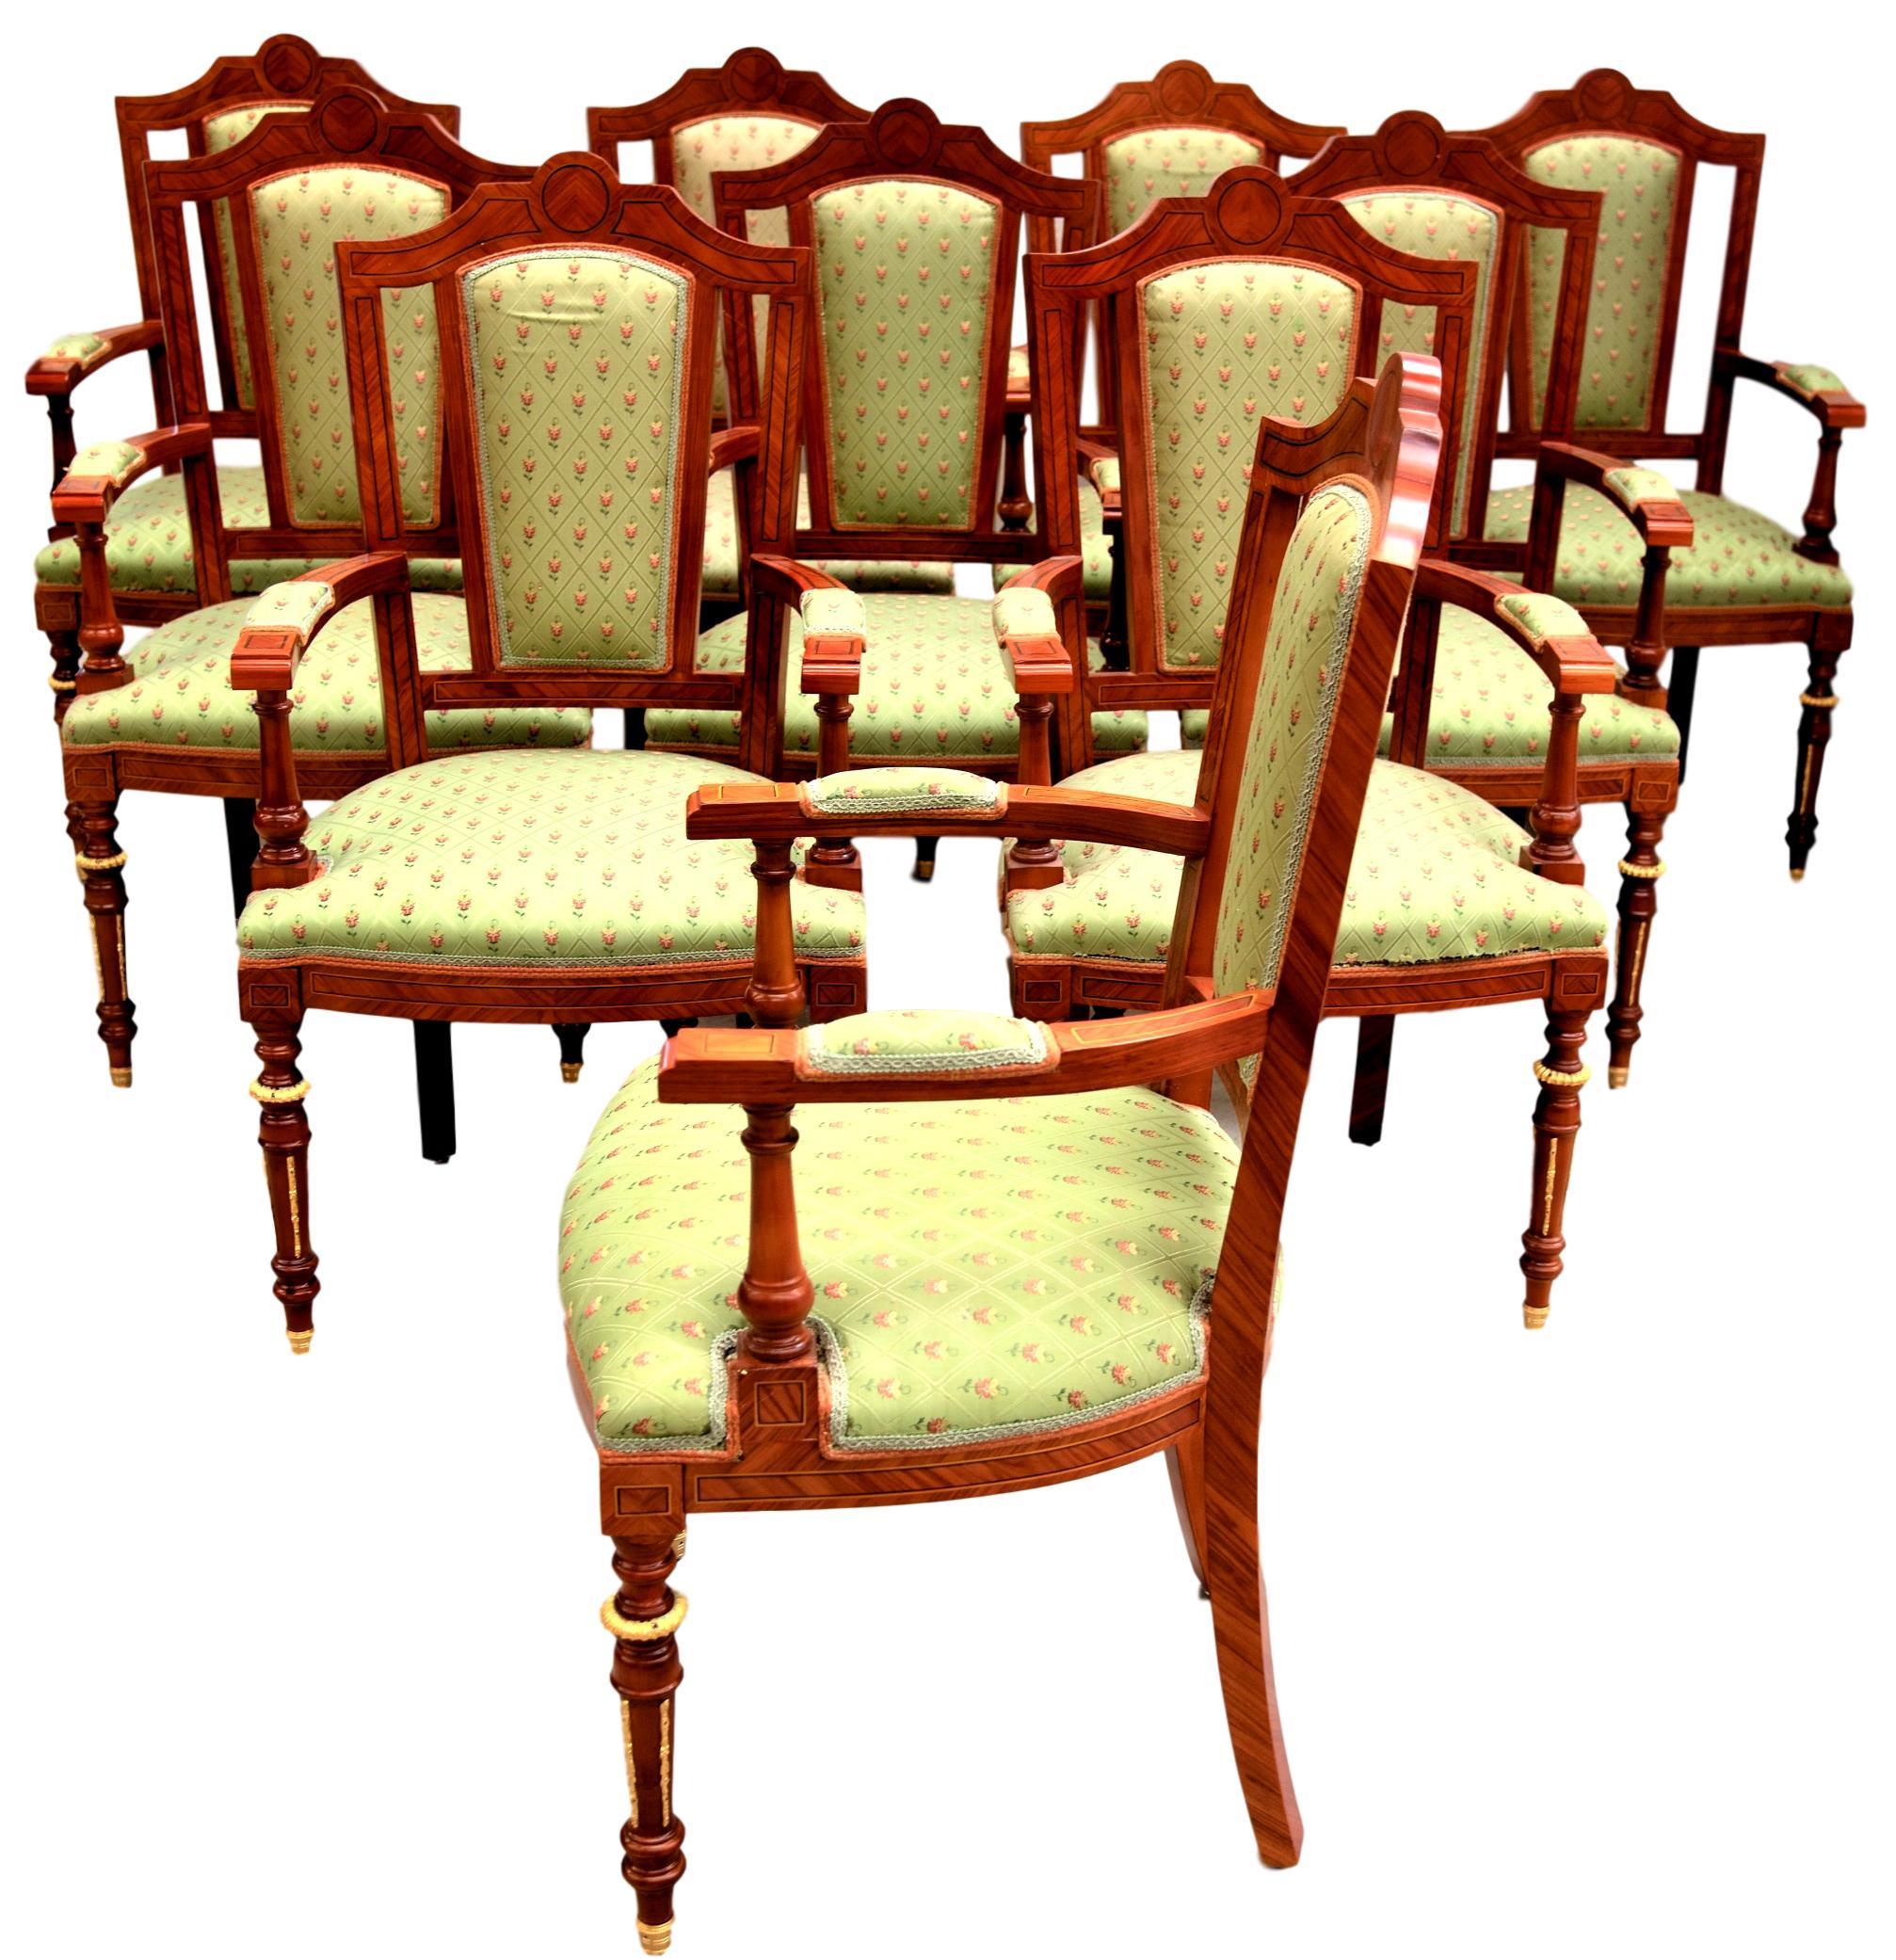 Set of 50 superb dining chairs, upholstered in green decorated fabric, in Rosewood with inlaid decorations and gilt bronze details. made in Italy, circa 1990s.

These elegant dining chairs show traditional and classic design aesthetic lines with